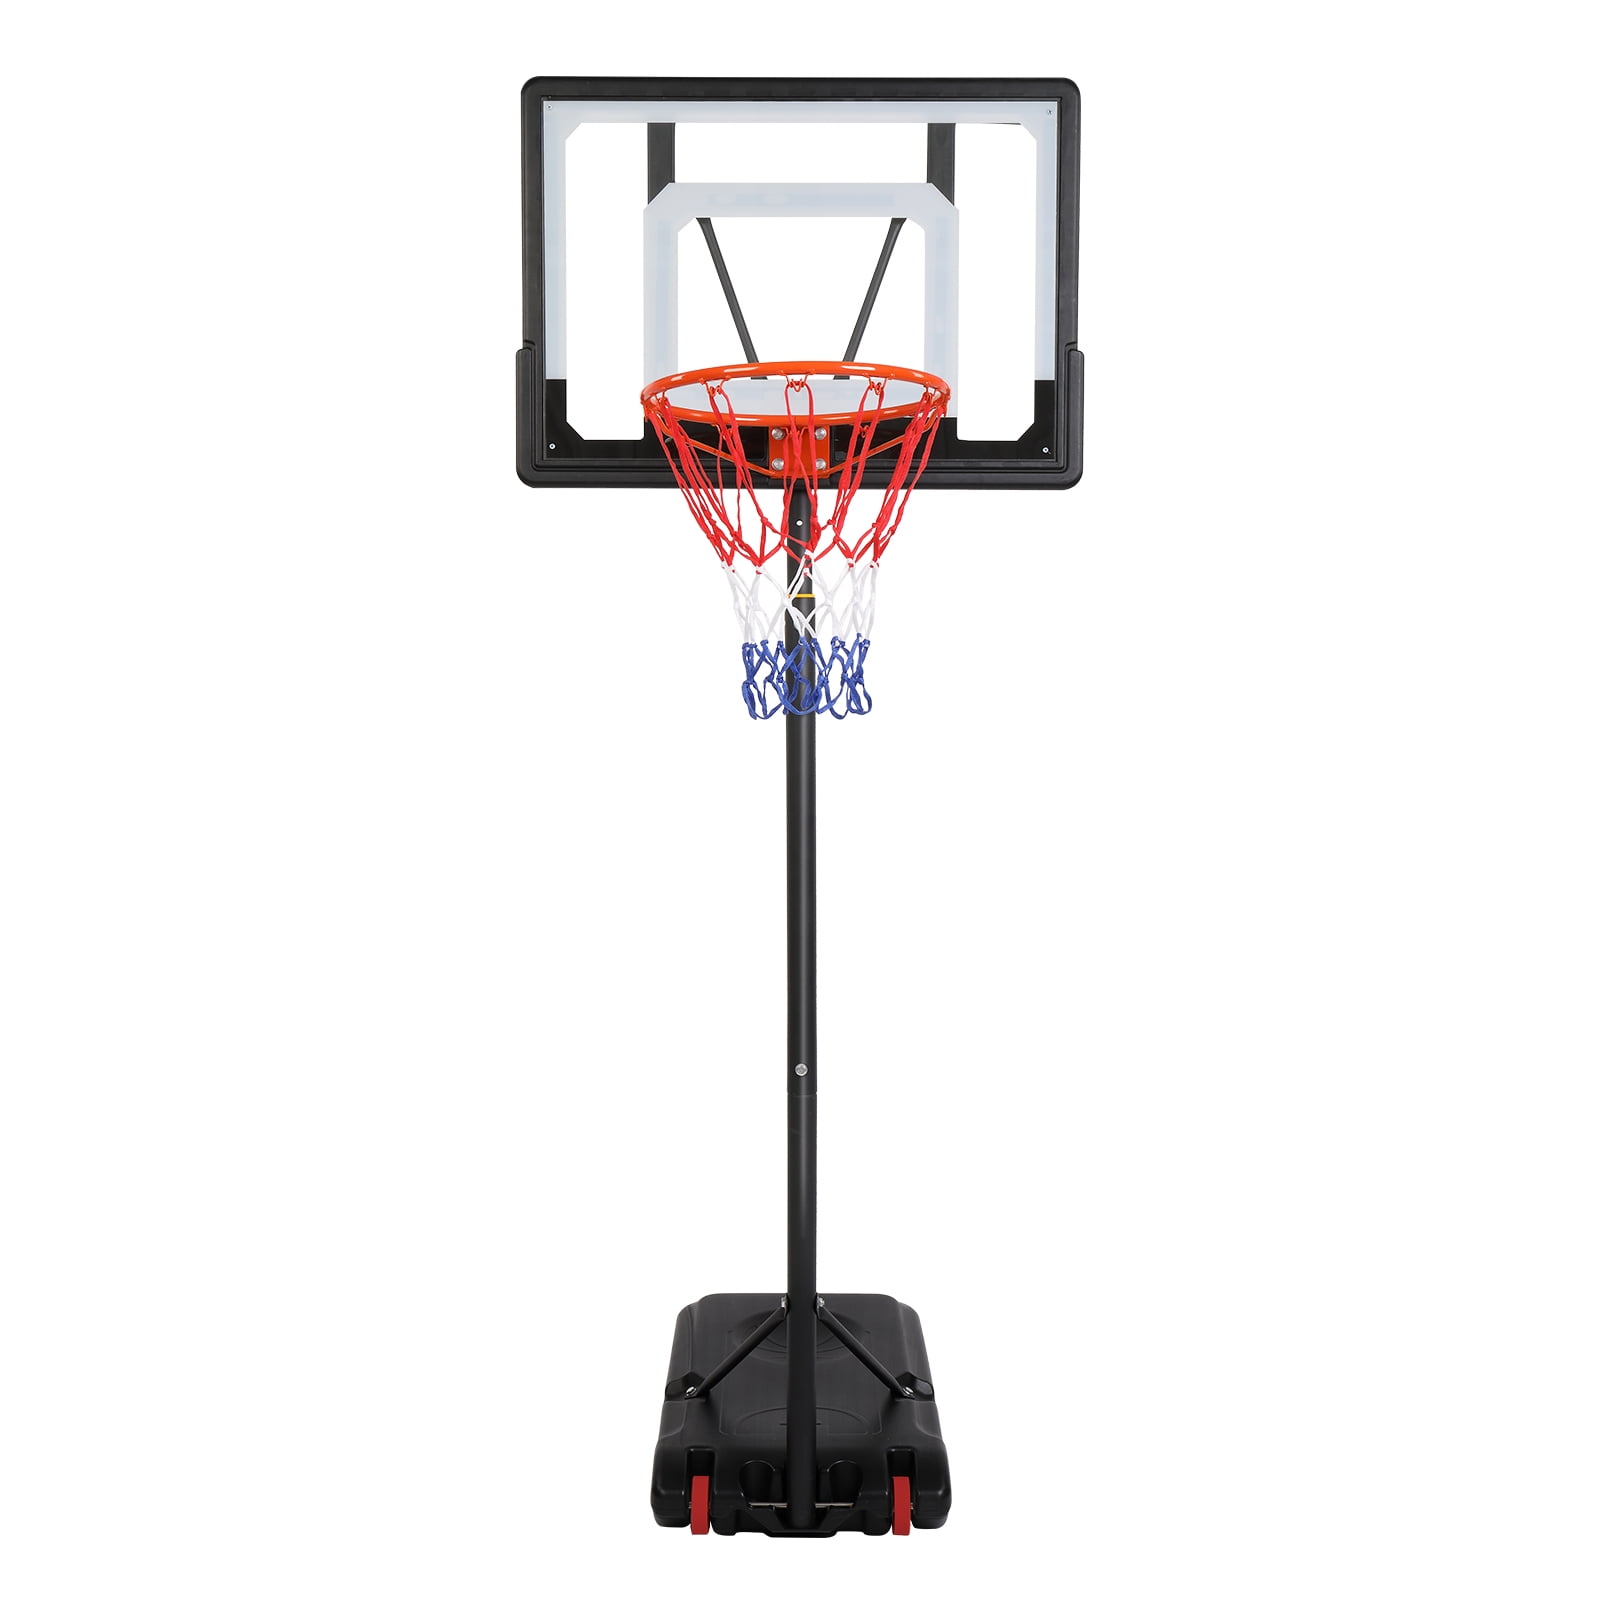 Basketball Hoop, 6.8-8.5ft Adjustable Kids In-Ground Basketball Hoop with Wheels, Portable Basketball Net with PVC Impact Backboard for Playing in Gym